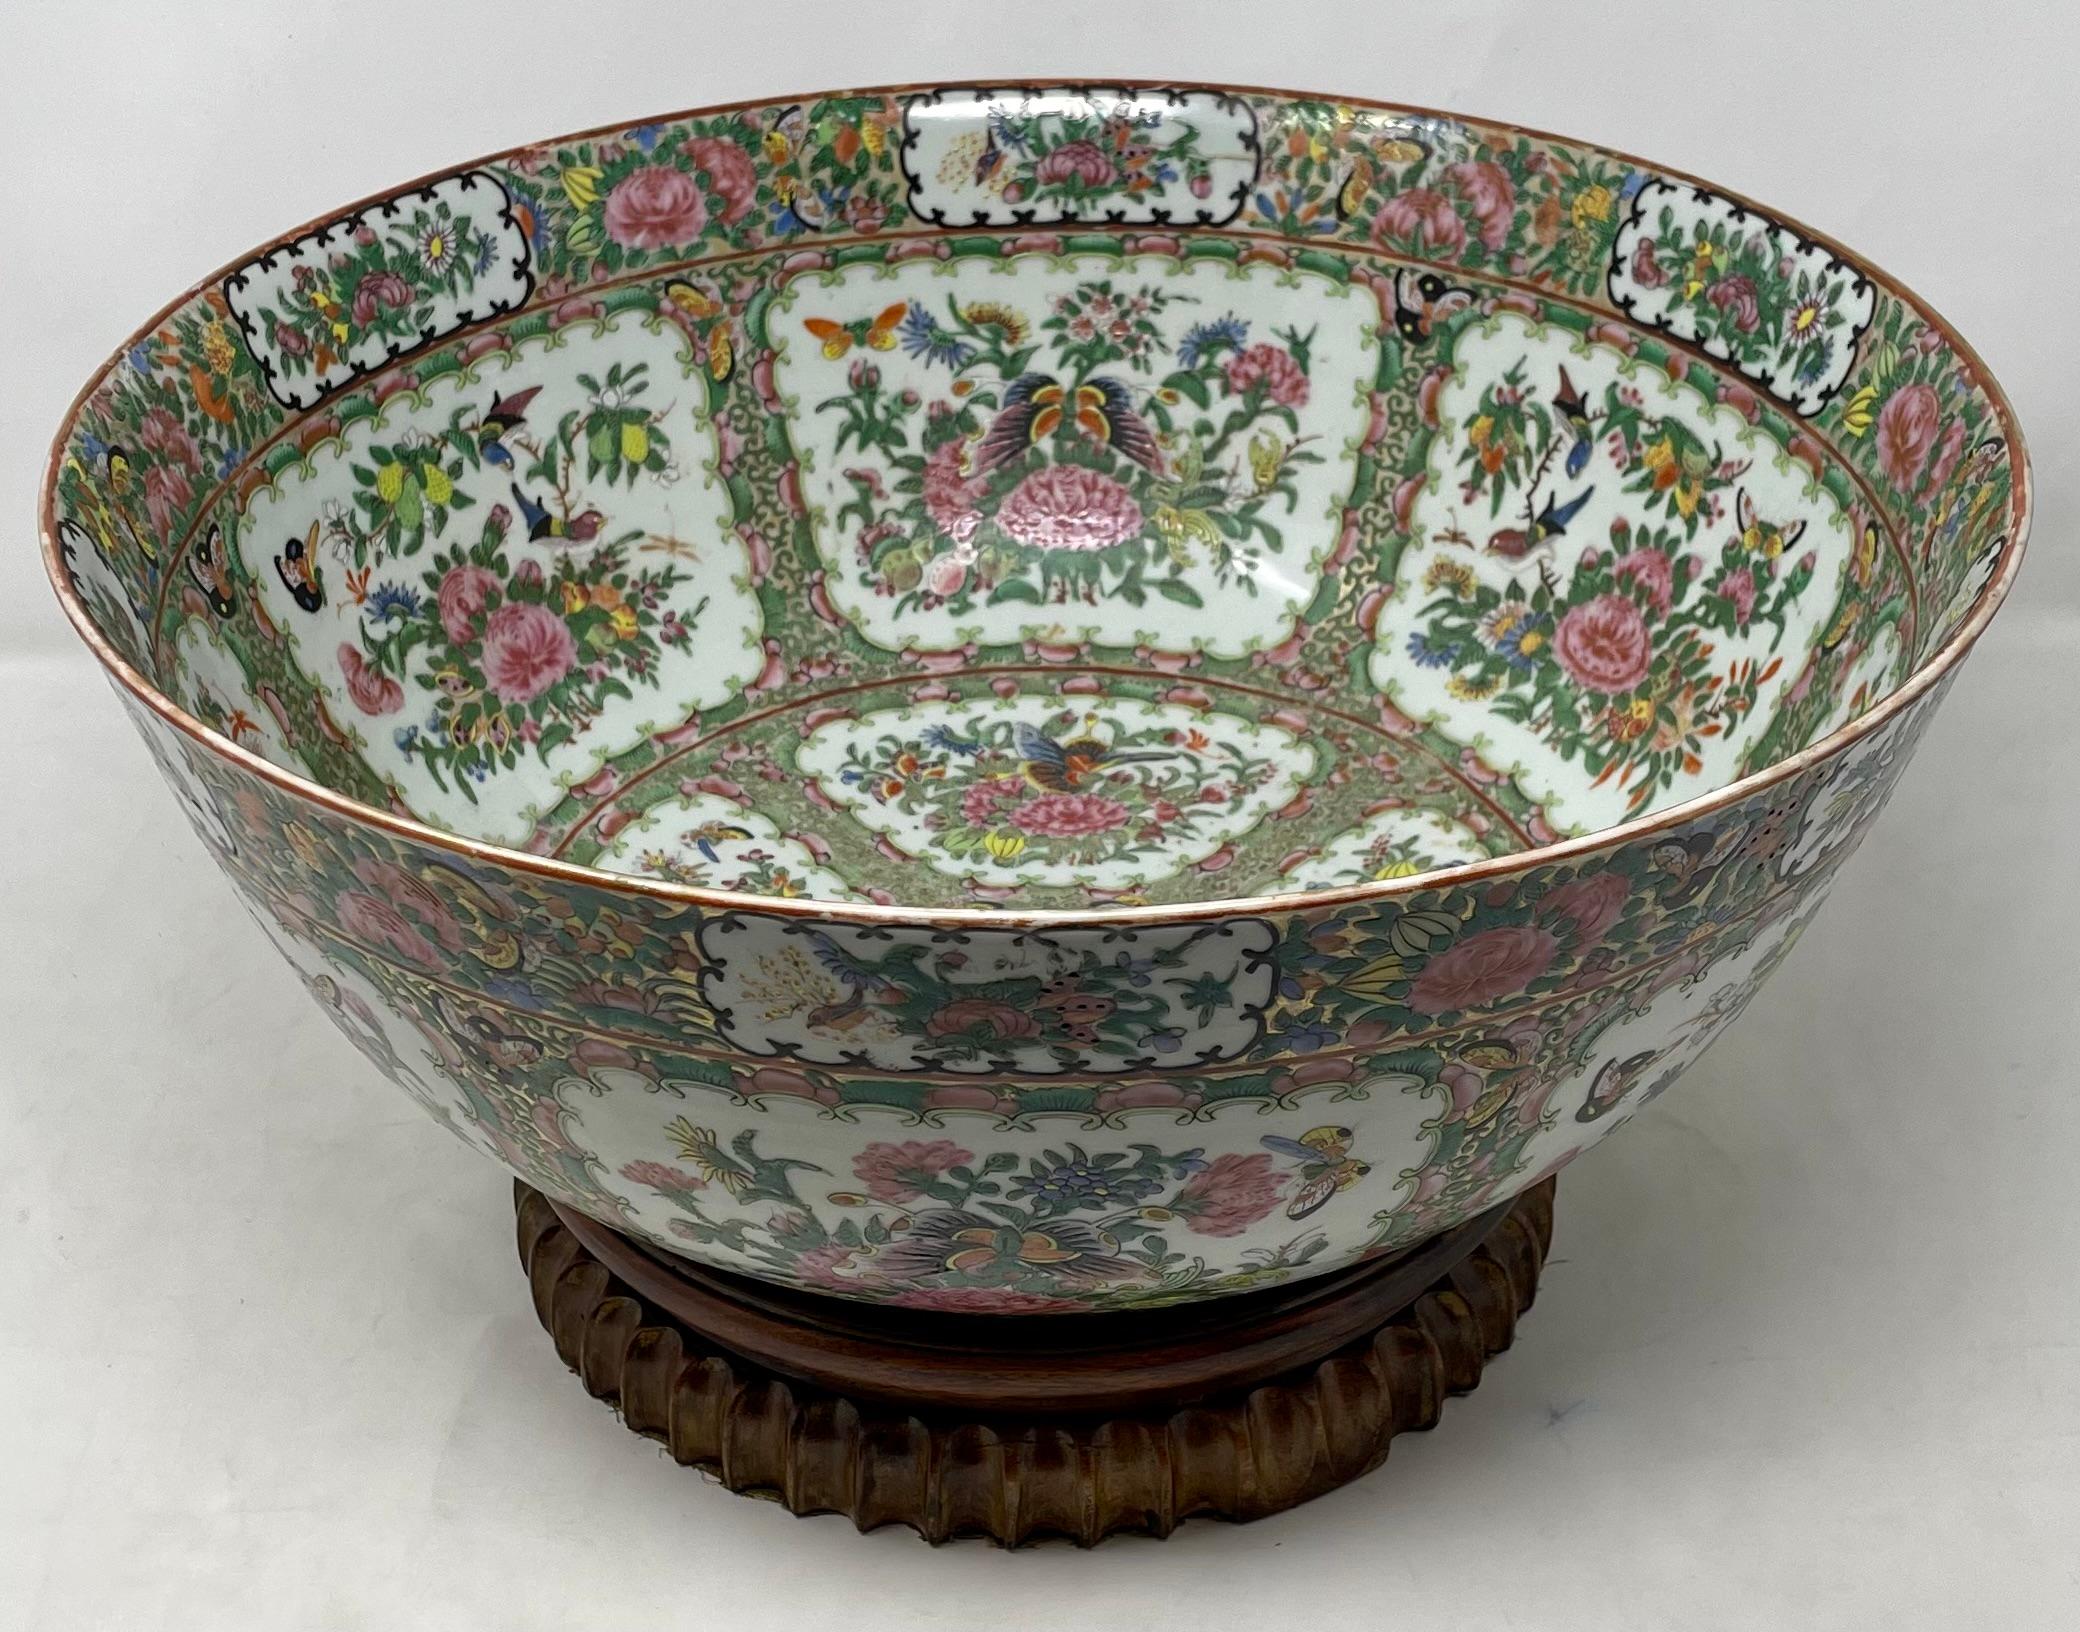 Large antique 19th century Chinese Rose Canton porcelain bowl on original stand.